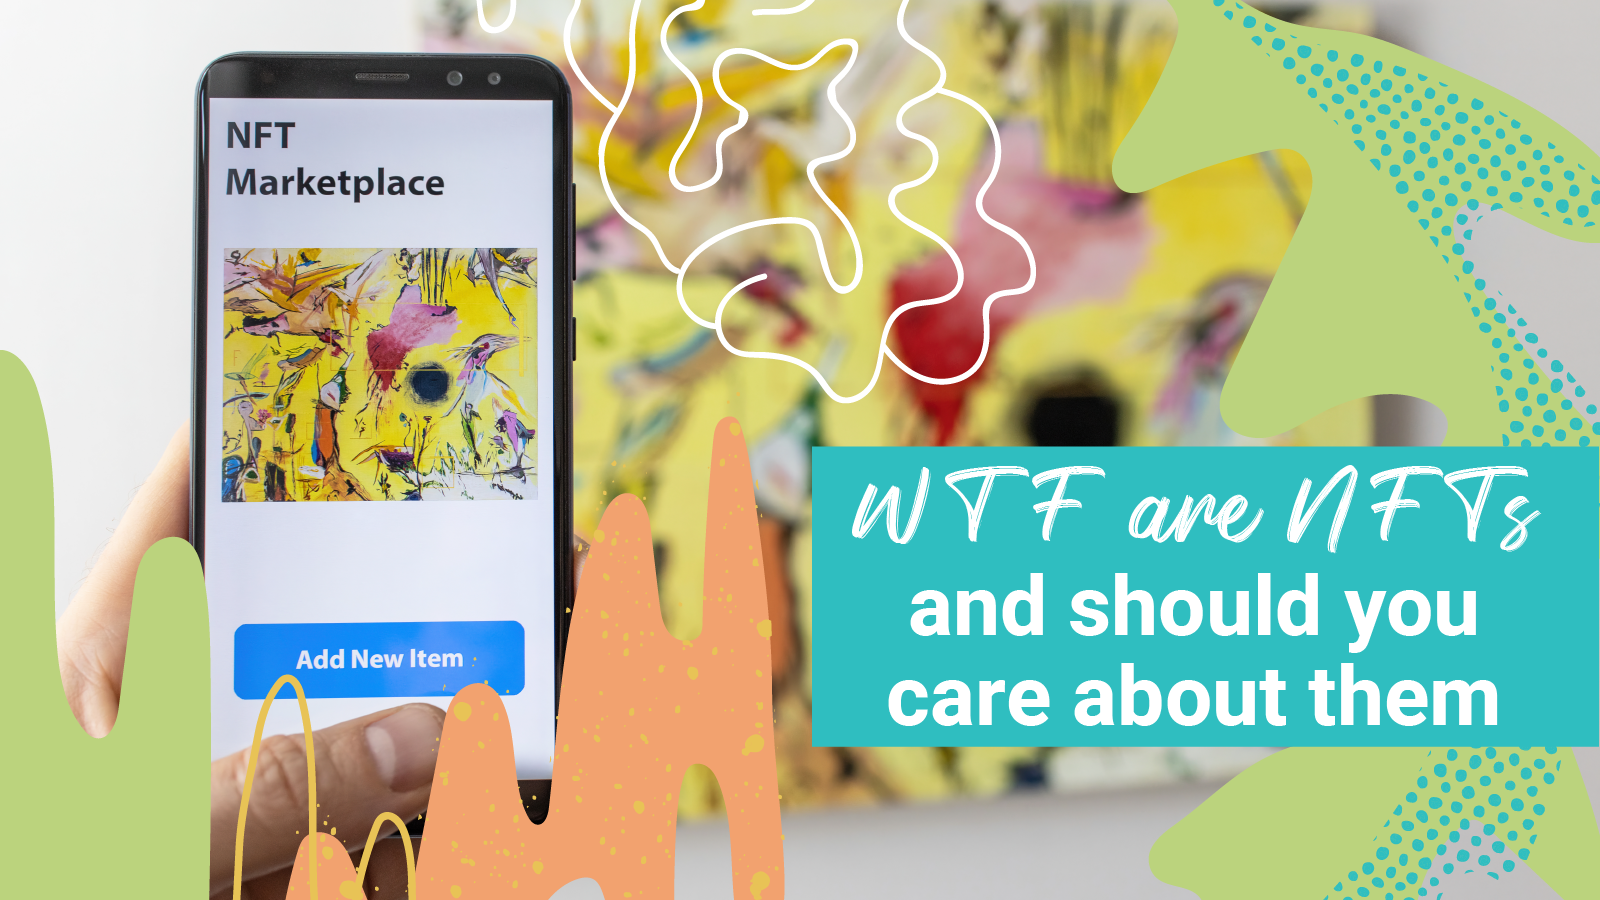 "WTF are NFTs and should you care about them?"